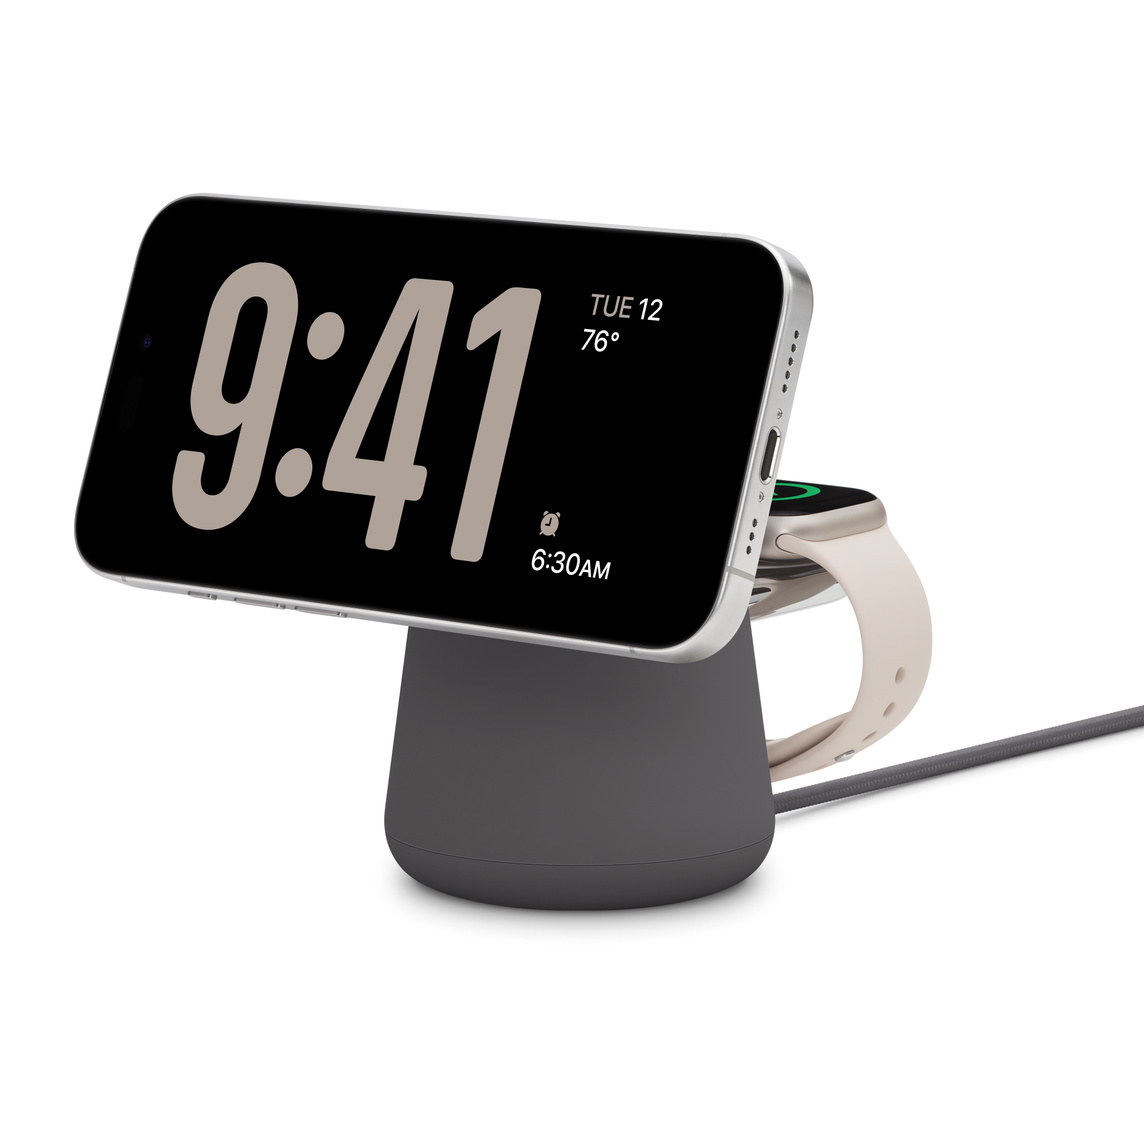 Belkin BOOST CHARGE PRO 2-in-1 Wireless Charging Dock with MagSafe, iPhone charging in landscape position, Apple Watch behind it also charging, USB-C charging cable at bottom